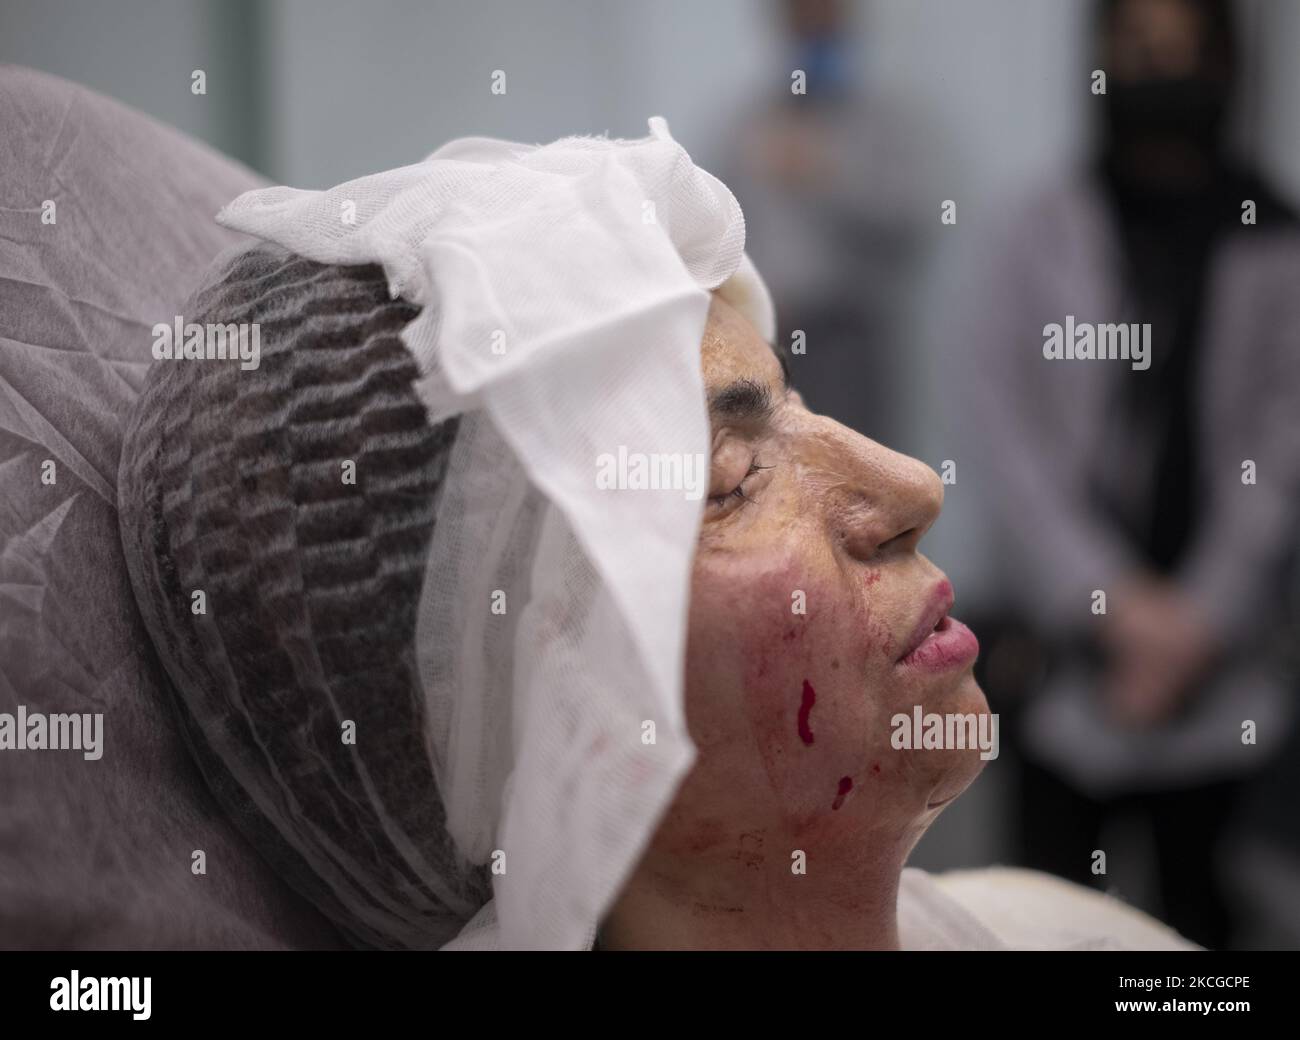 Masoumeh Ataei, who is a victim of an acid attack, after the restorative operation of the fat injection under the skin of her face at the Nilforoushzadeh dermatology clinic in northern Tehran, on June 19, 2021. Ten years ago, one and a half year after Masoumeh Ataei getting a divorce from her husband, lost her face and her sight after an acid attack by her father-in-law but, she had to forgive him because of a personal reason, Now after ten years she has to go to Britain and has to collect 70,000 GBP for the surgery expenses If she wants to regain her sight. (Photo by Morteza Nikoubazl/NurPhot Stock Photo